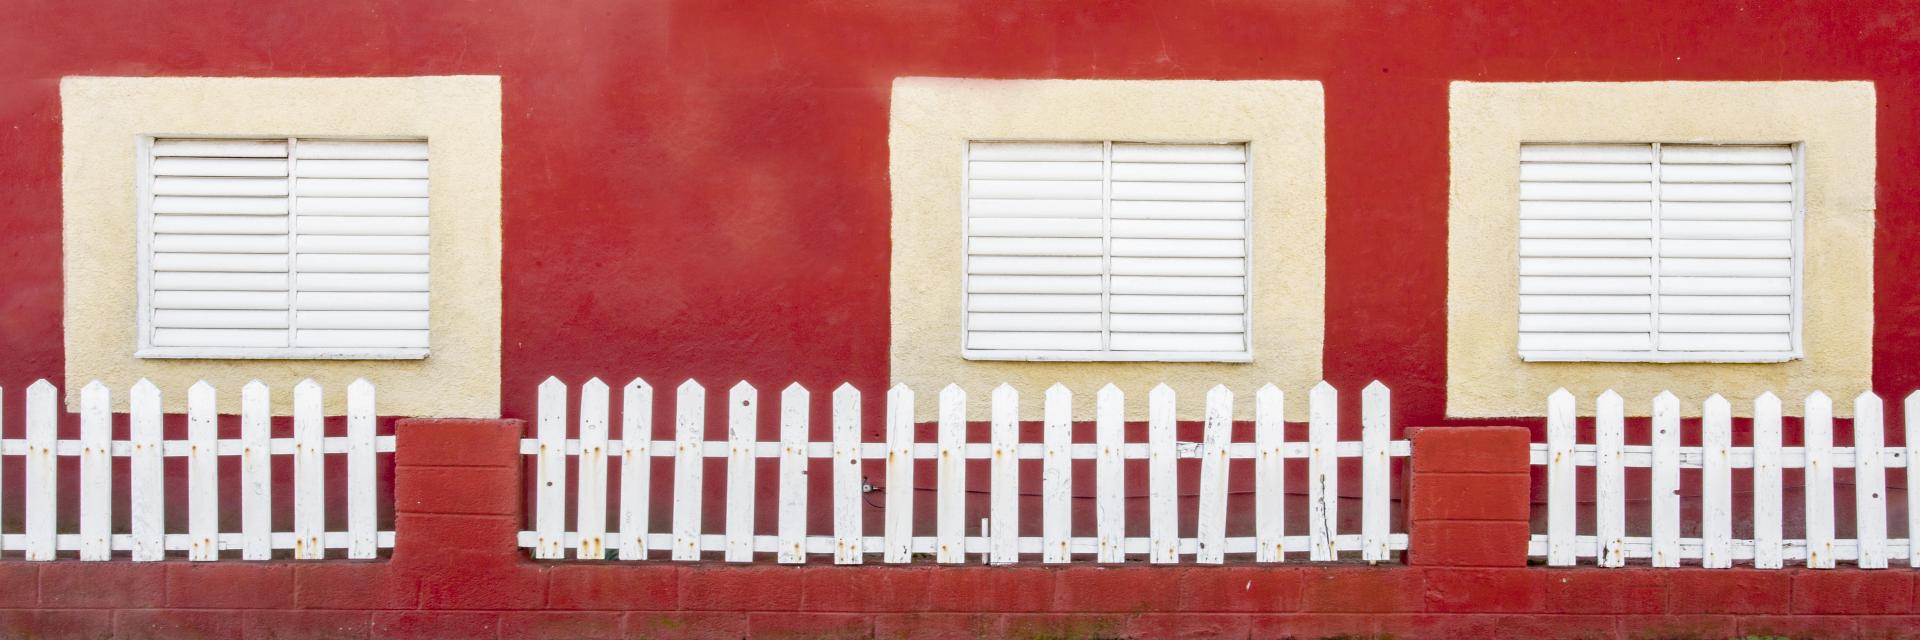 62433p architecture, windows, fence, red, 5mb .jpg